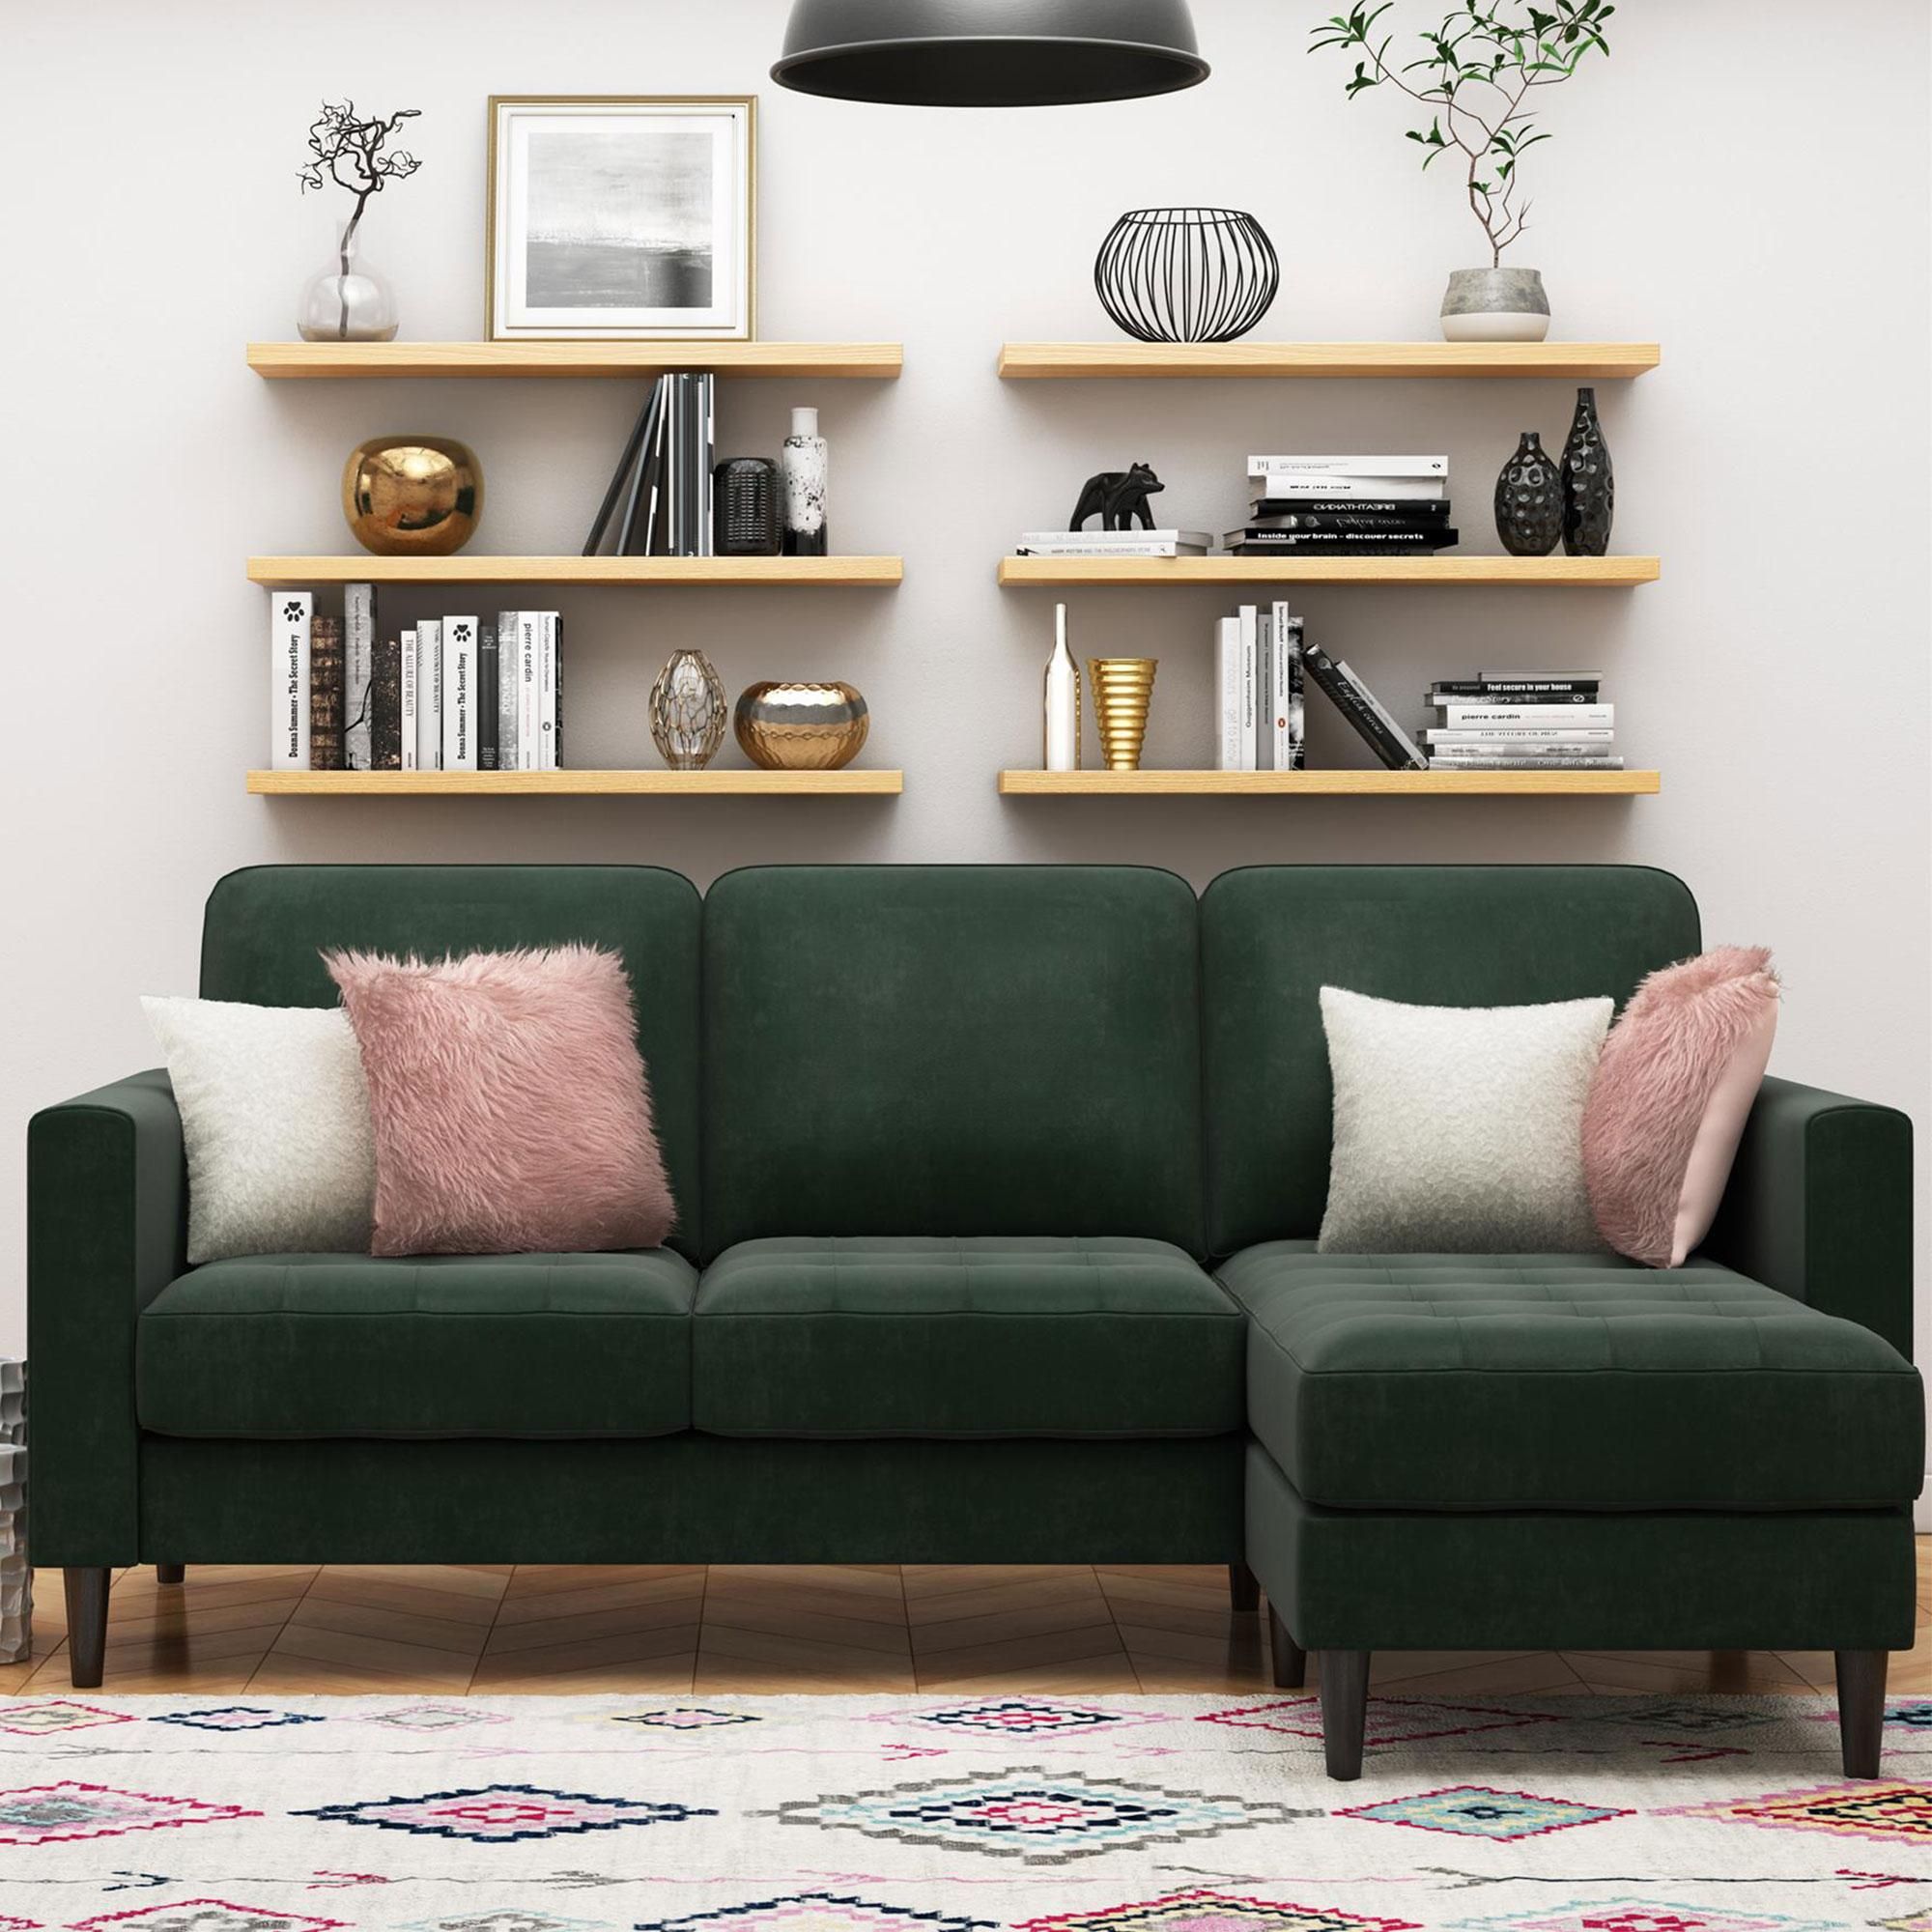 Dorel Asia Strummer 2 Piece Reversible Sectional Sofa With Chaise In Green  Velvet | Nfm Pertaining To Reversible Sectional Sofas (Gallery 14 of 20)